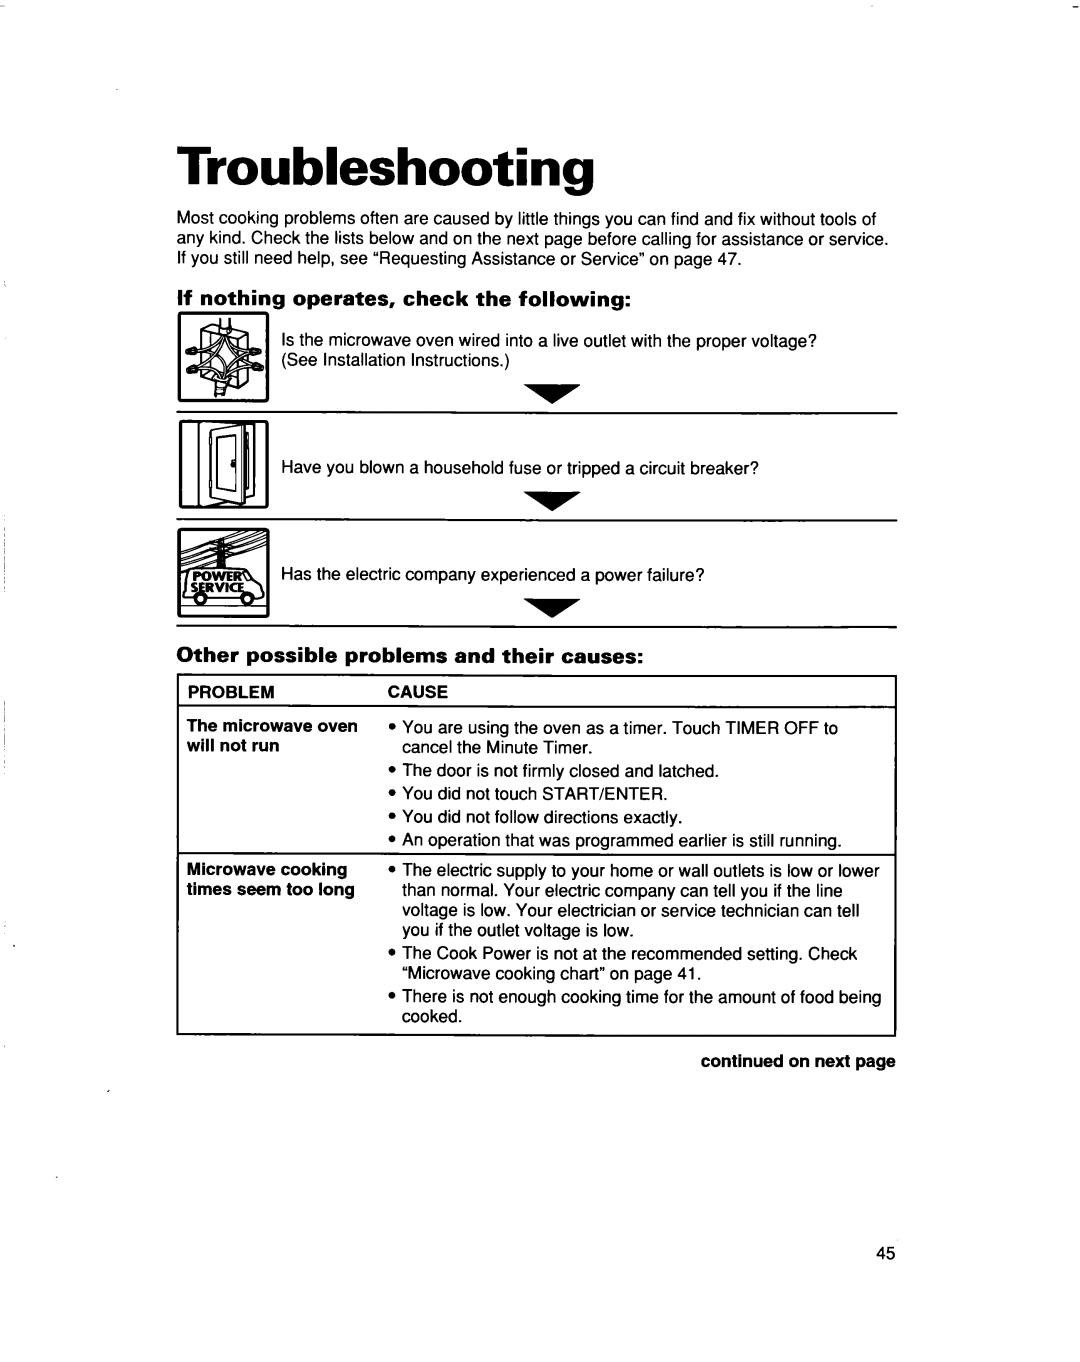 Whirlpool MHEI IRD Troubleshooting, If nothing operates, check the following, Other possible problems and their causes 